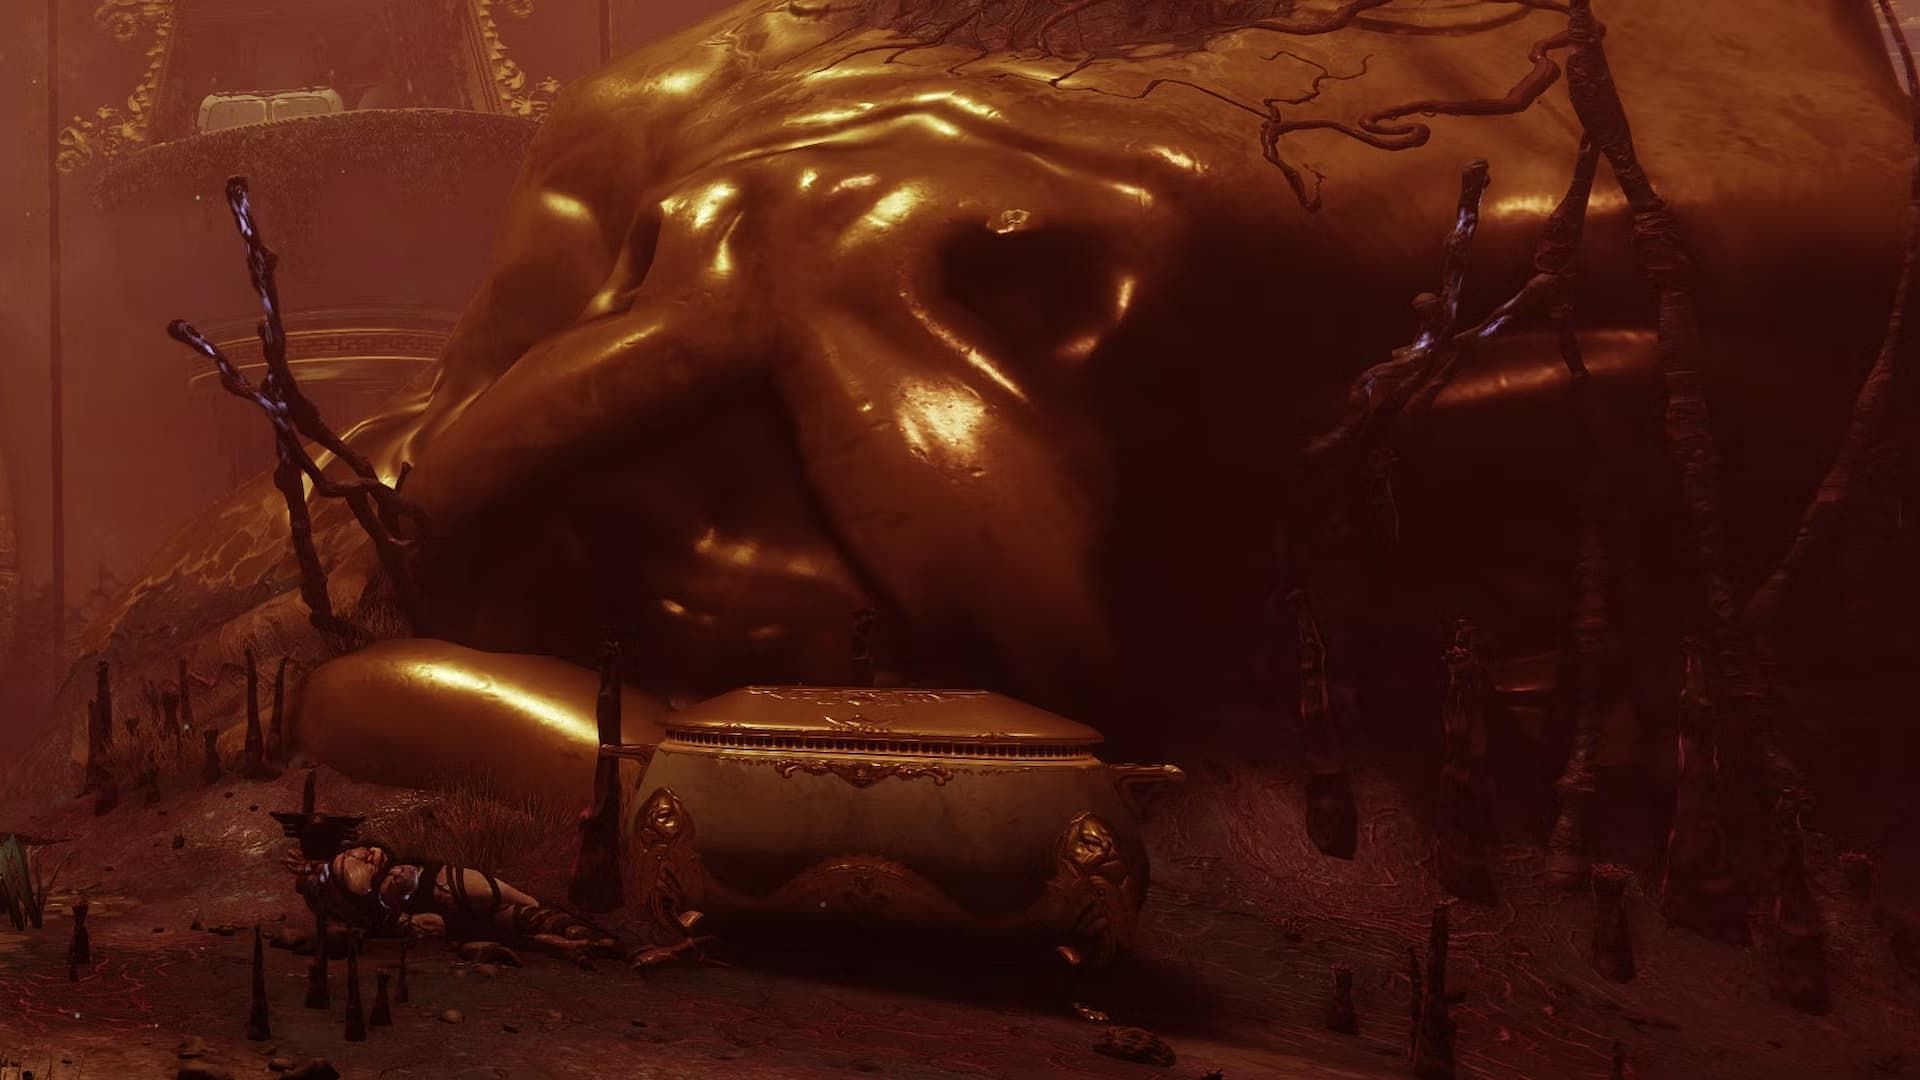 Opulent Chests were recently introduced in Destiny 2 (Image via Bungie)